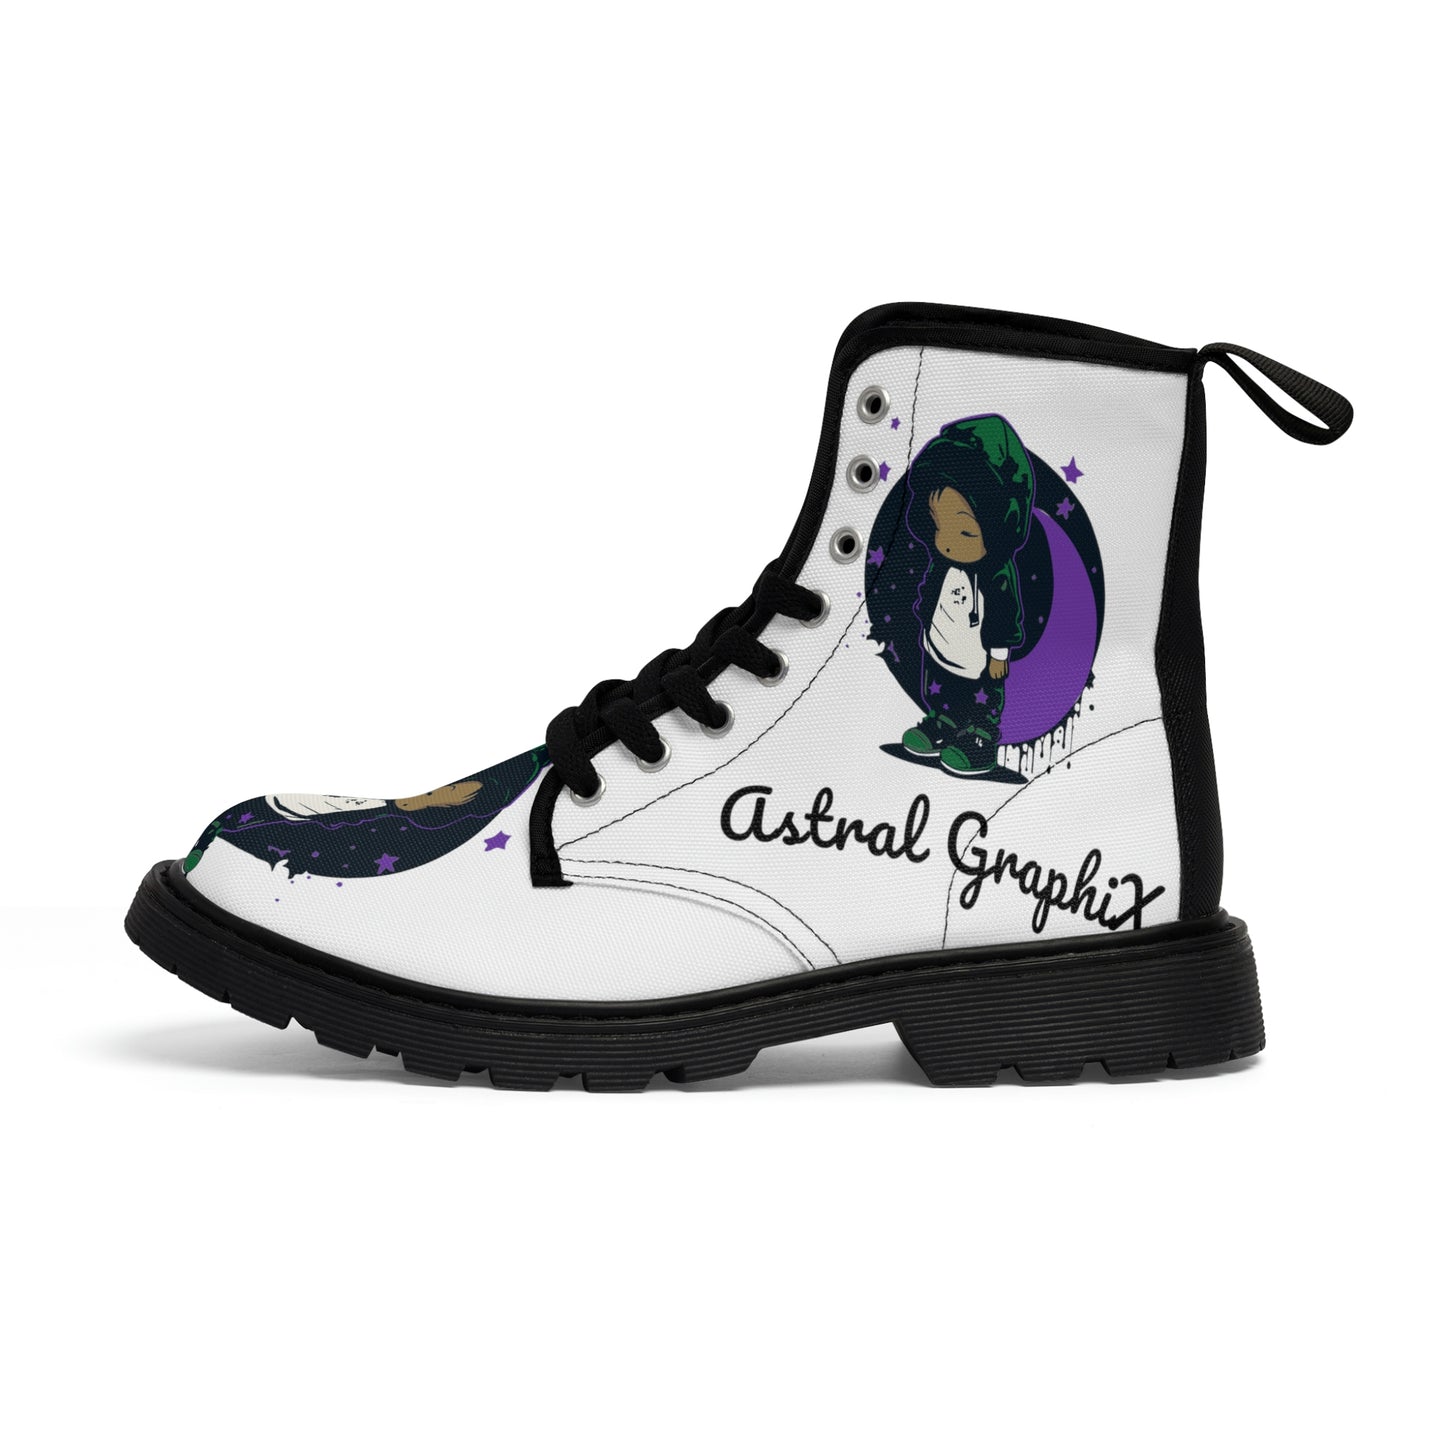 Astral GraphiX Logo Collection - Woman's Canvas Boots